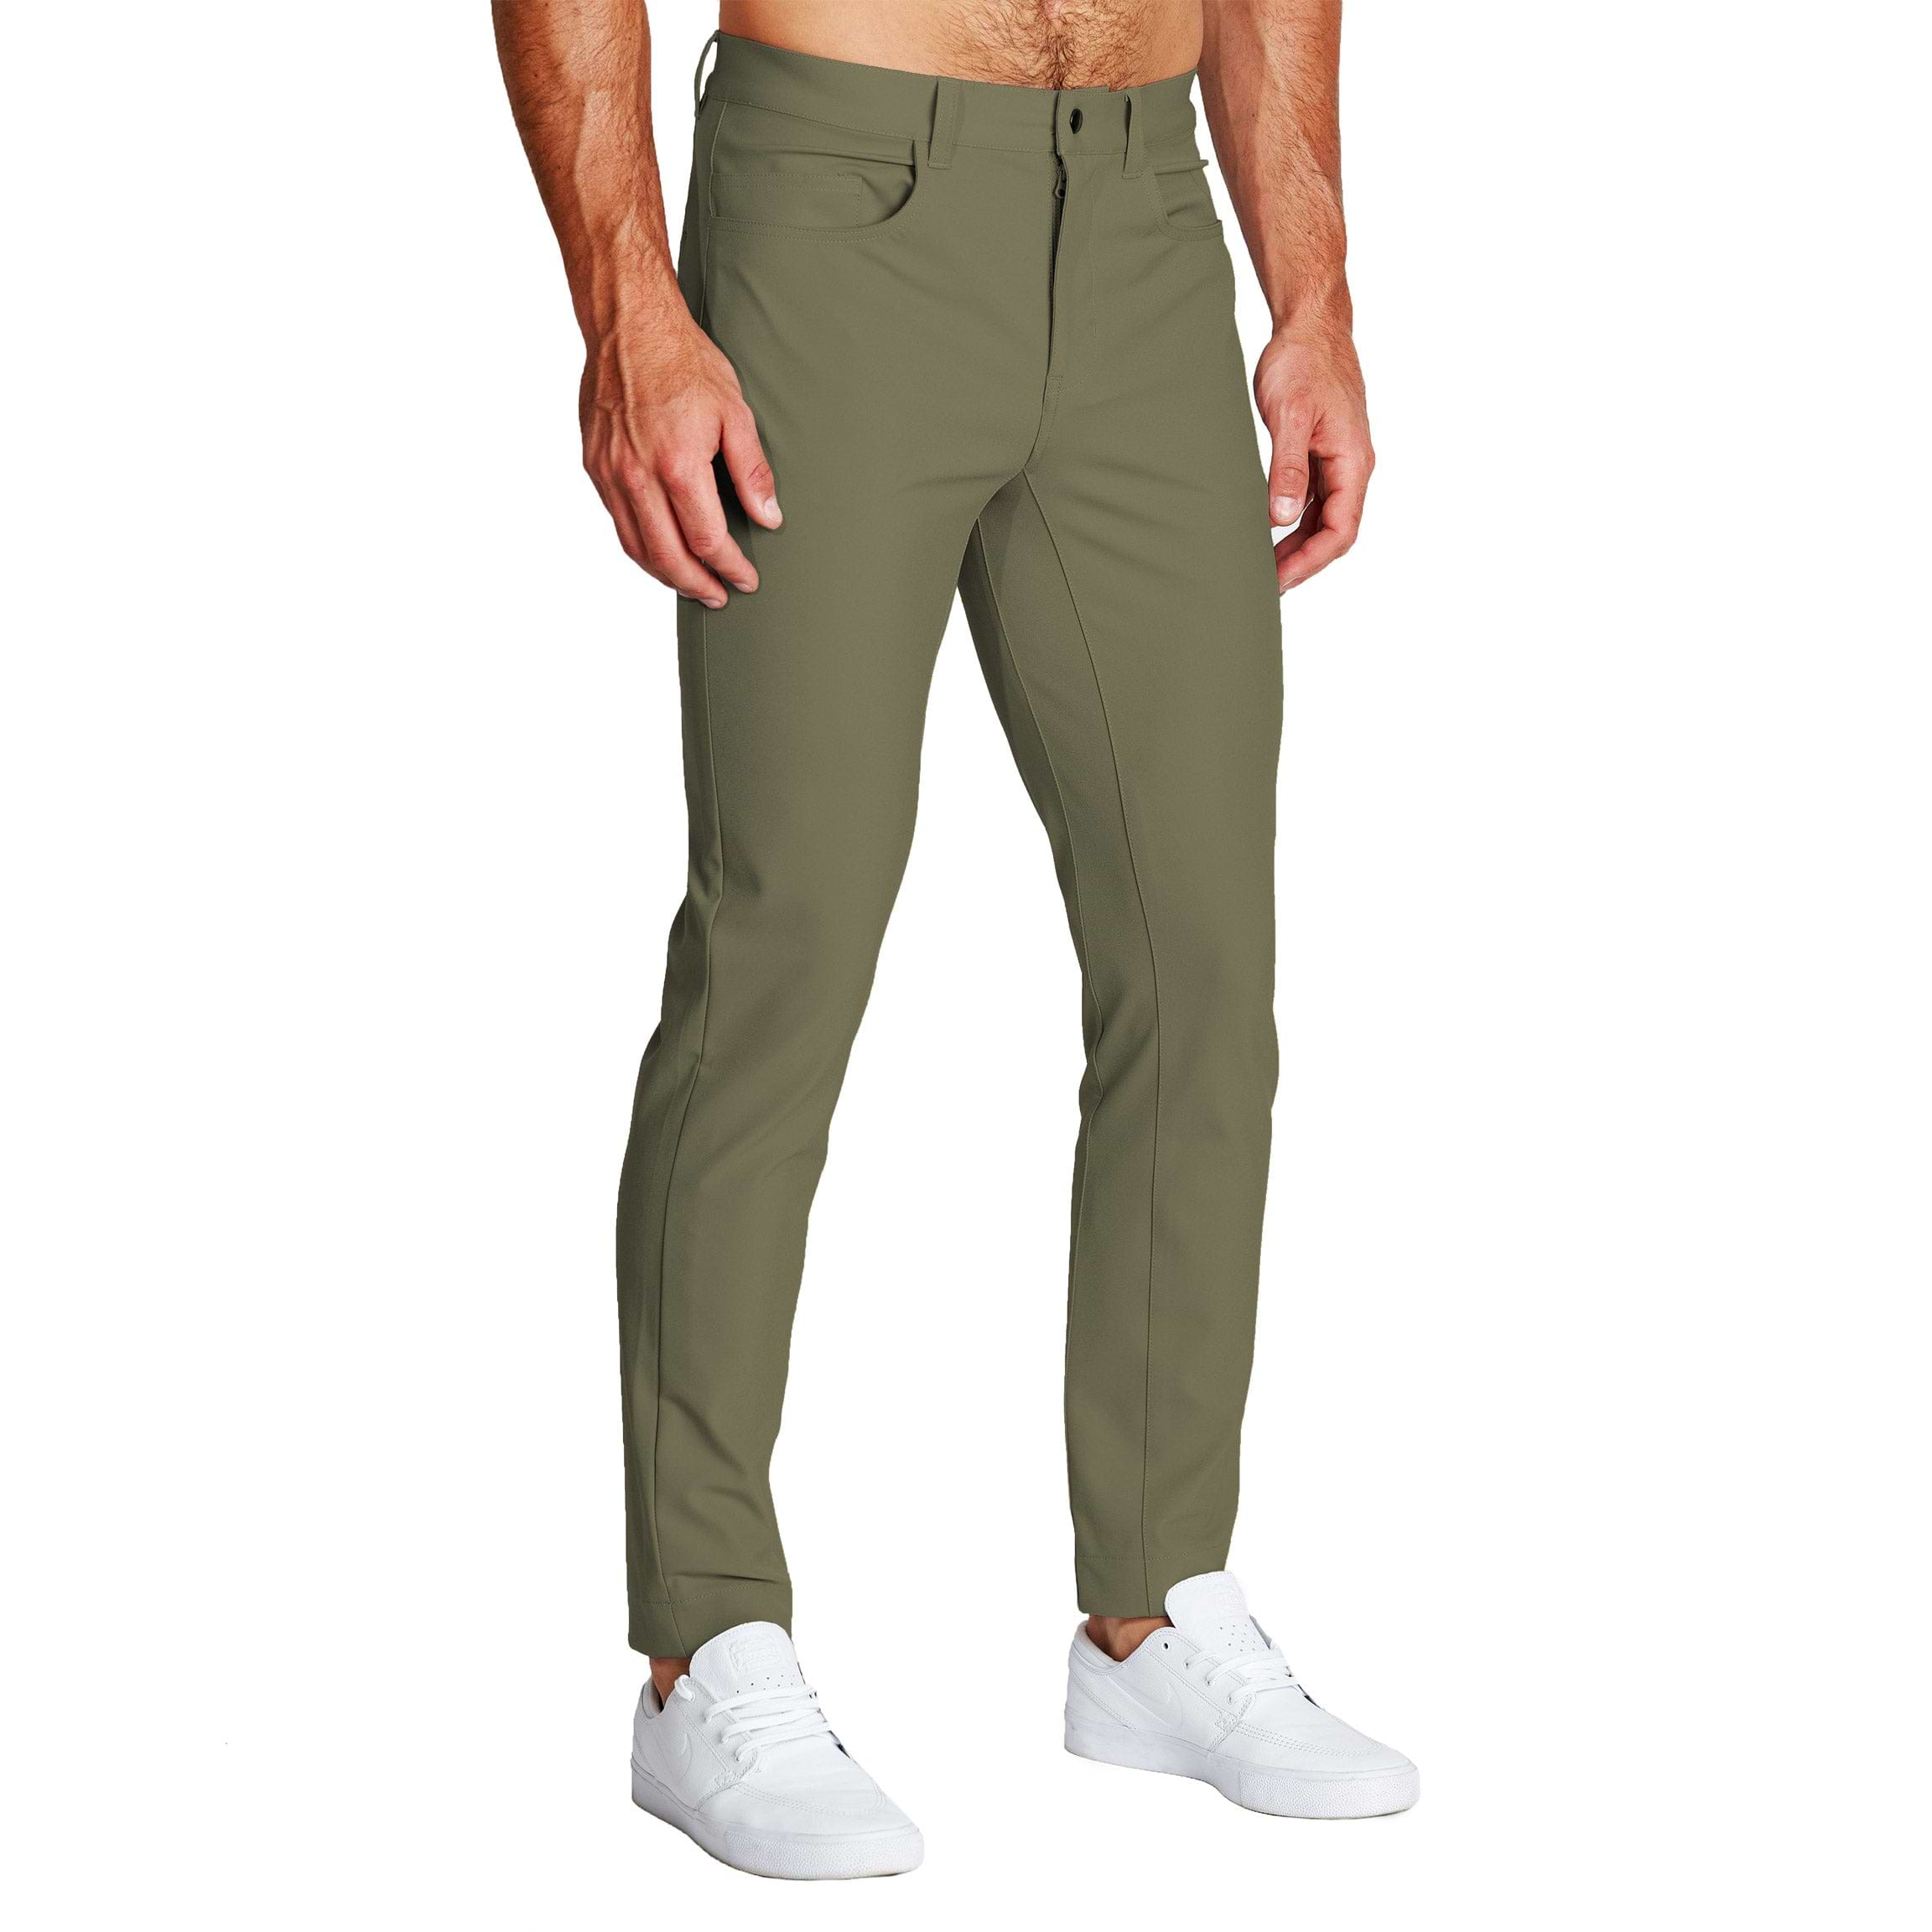 Racing Green Sand Donegal Athletic Fit Trouser